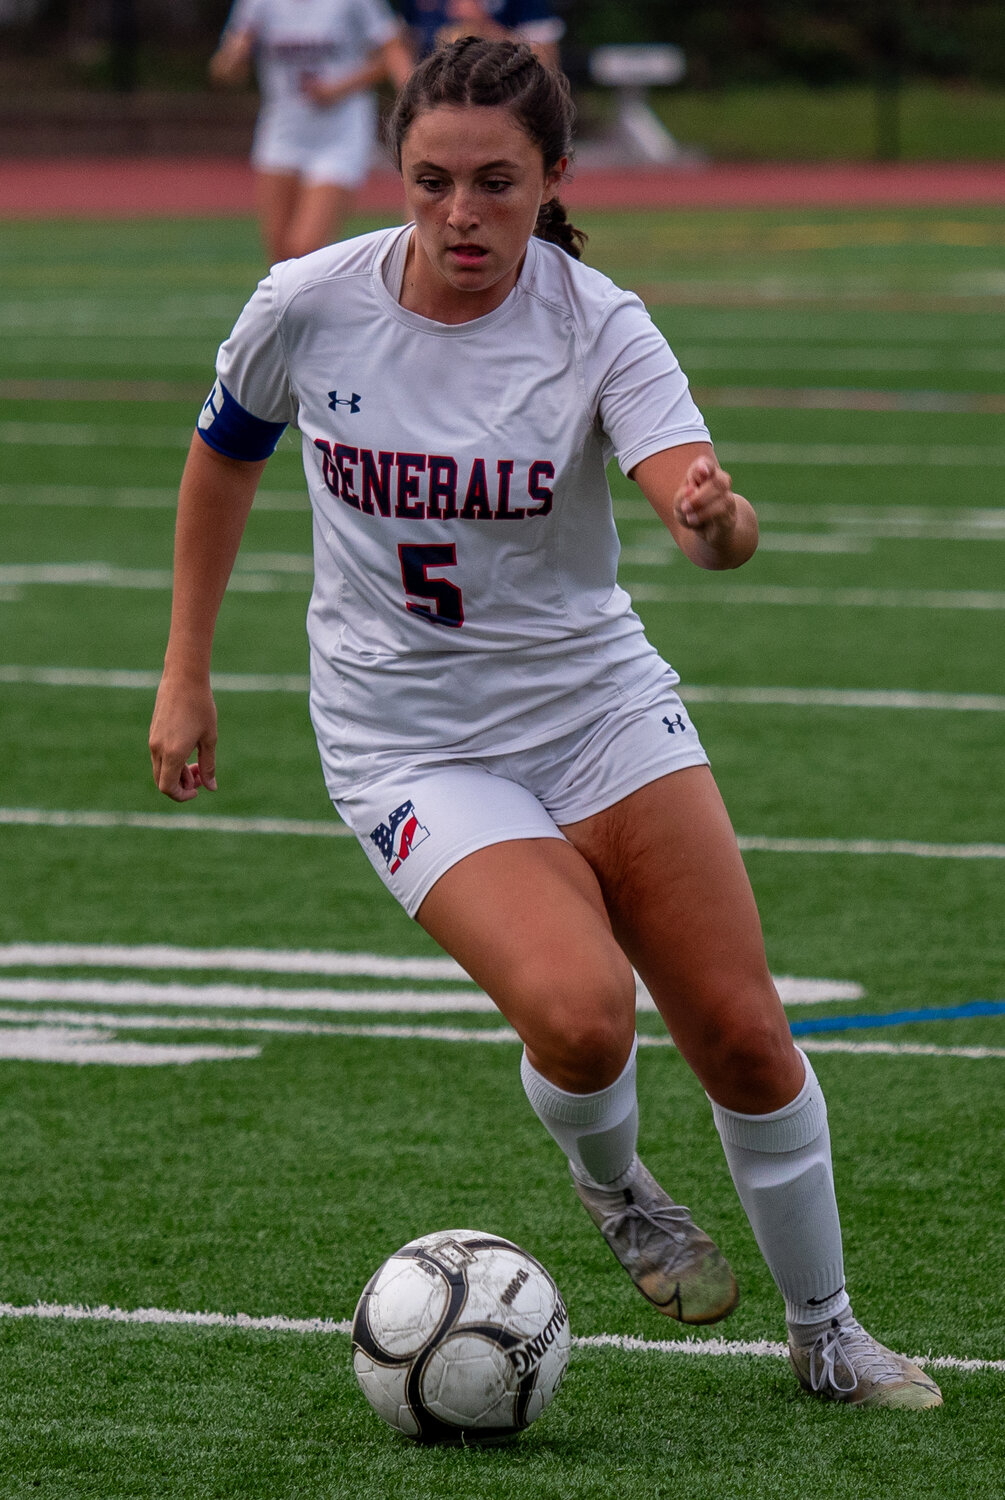 Senior Hailey Metzger is one of the key offensive ingredients for the Generals, who are defending county and L.I. champs.